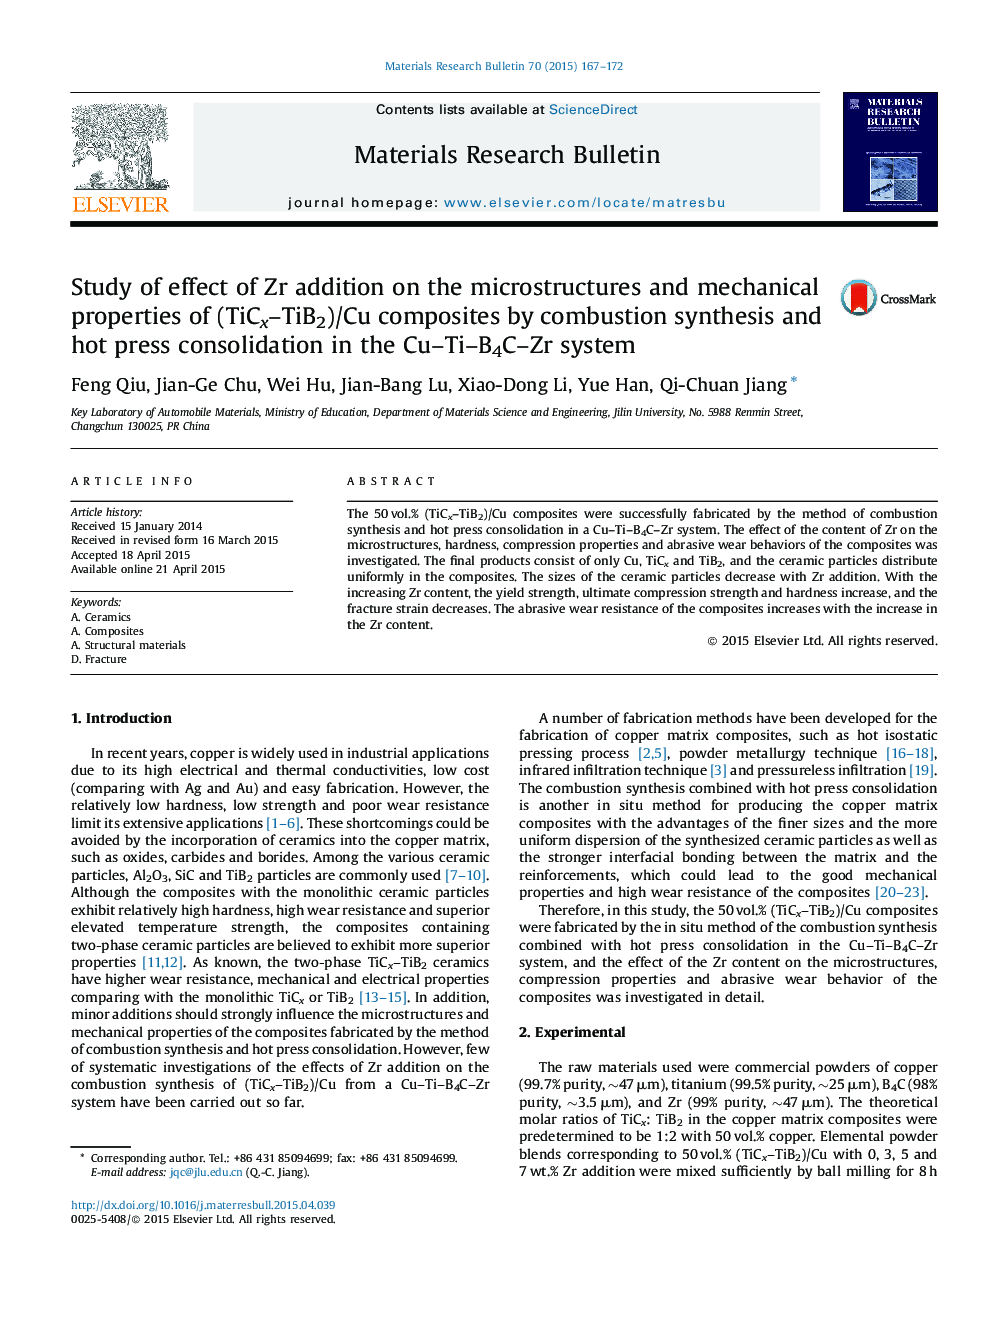 Study of effect of Zr addition on the microstructures and mechanical properties of (TiCx–TiB2)/Cu composites by combustion synthesis and hot press consolidation in the Cu–Ti–B4C–Zr system